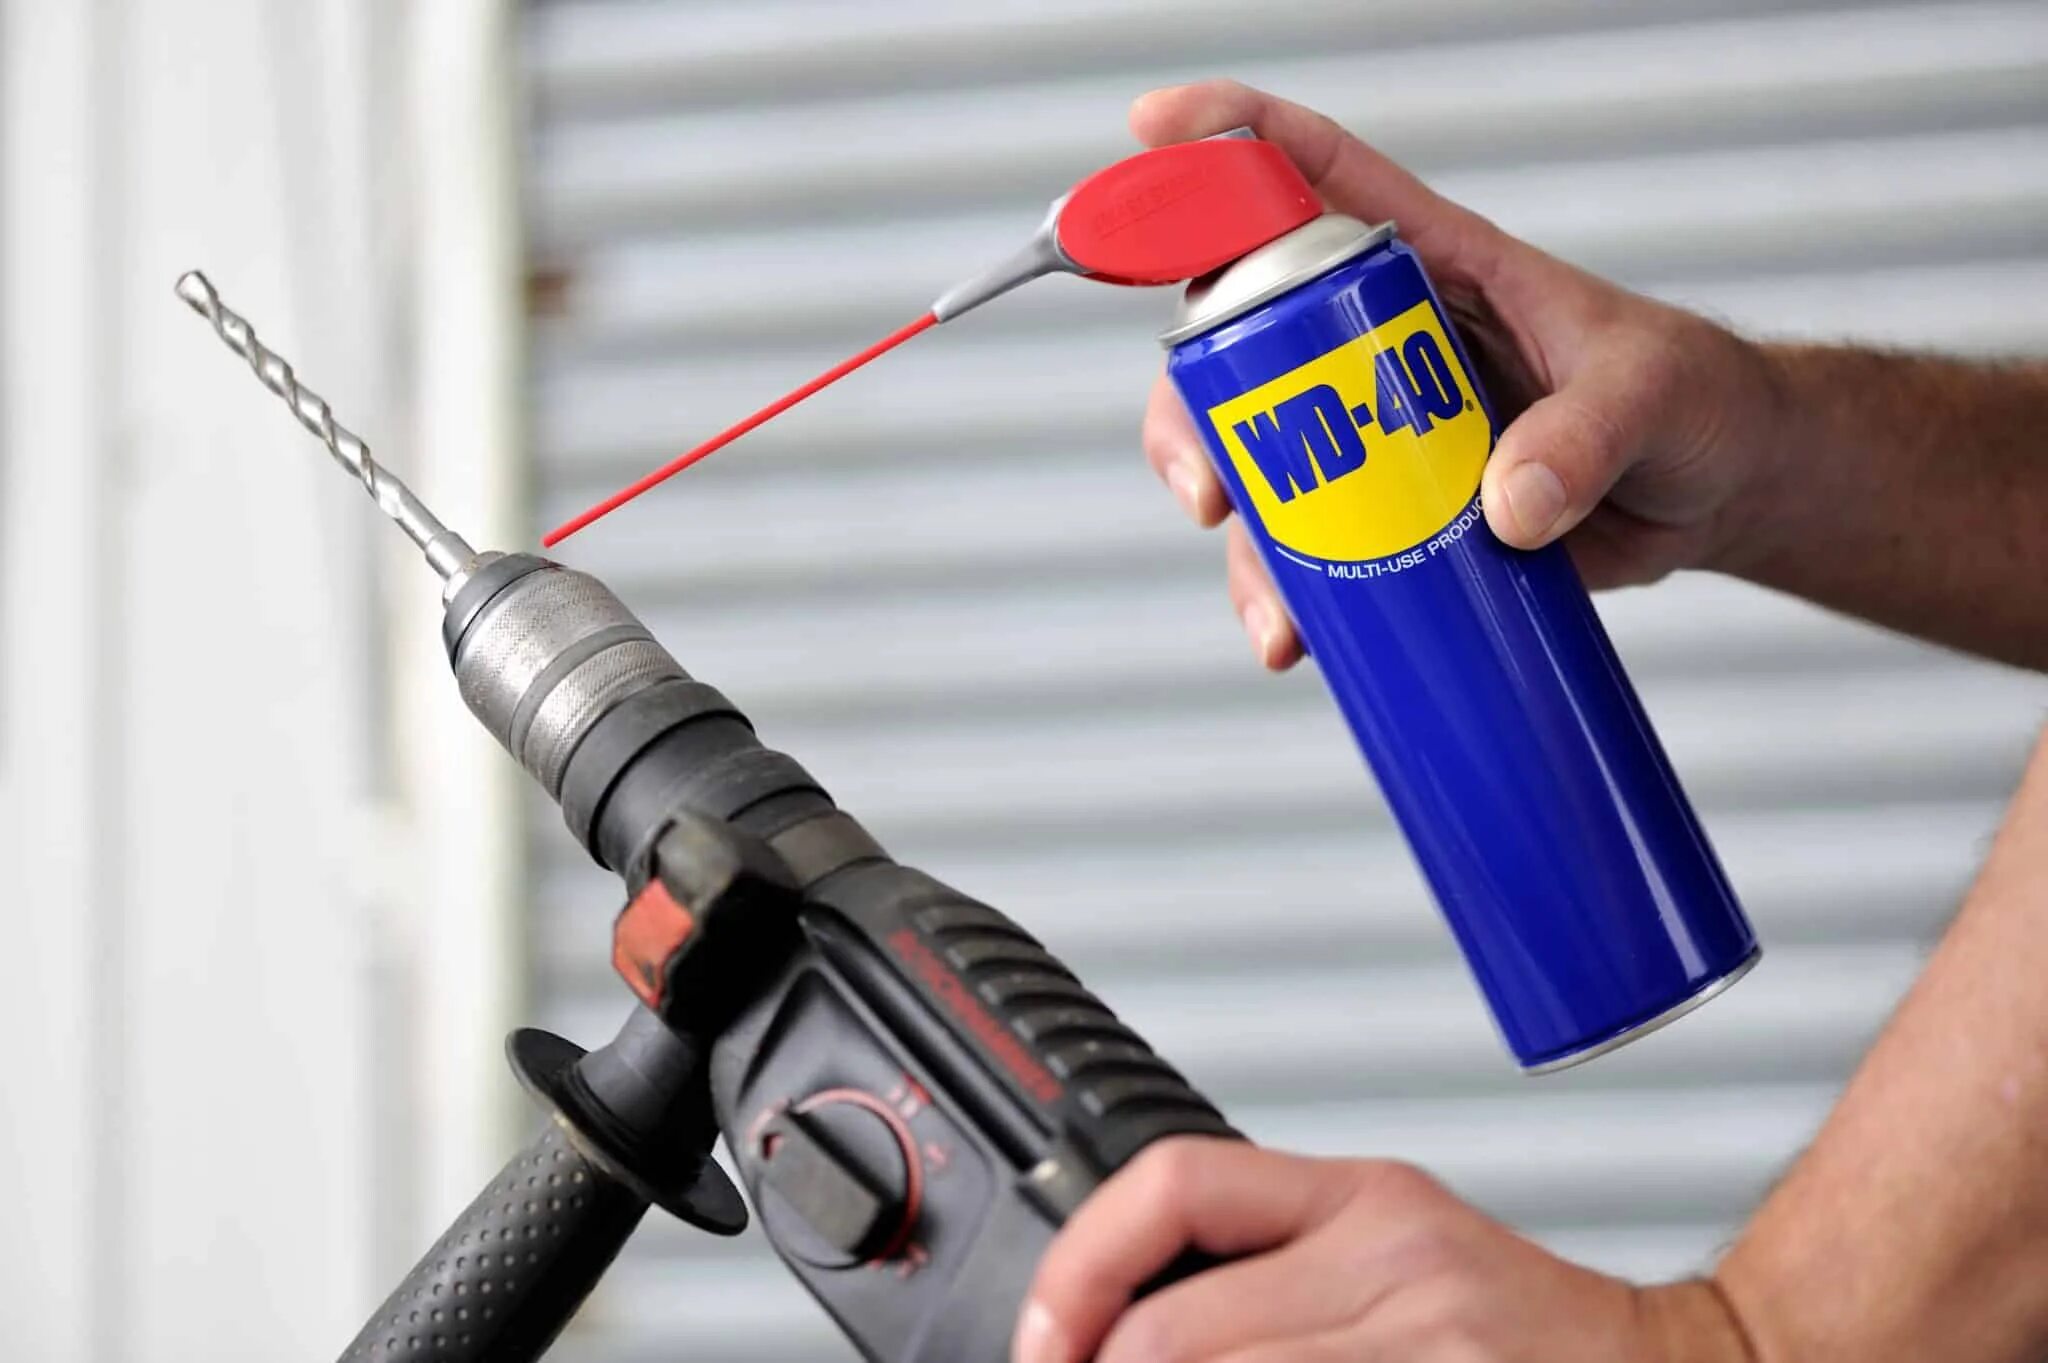 WD 40. Смазка WD-40. Wd40 wd0000. Wd40 патрон. Домашняя вд 40